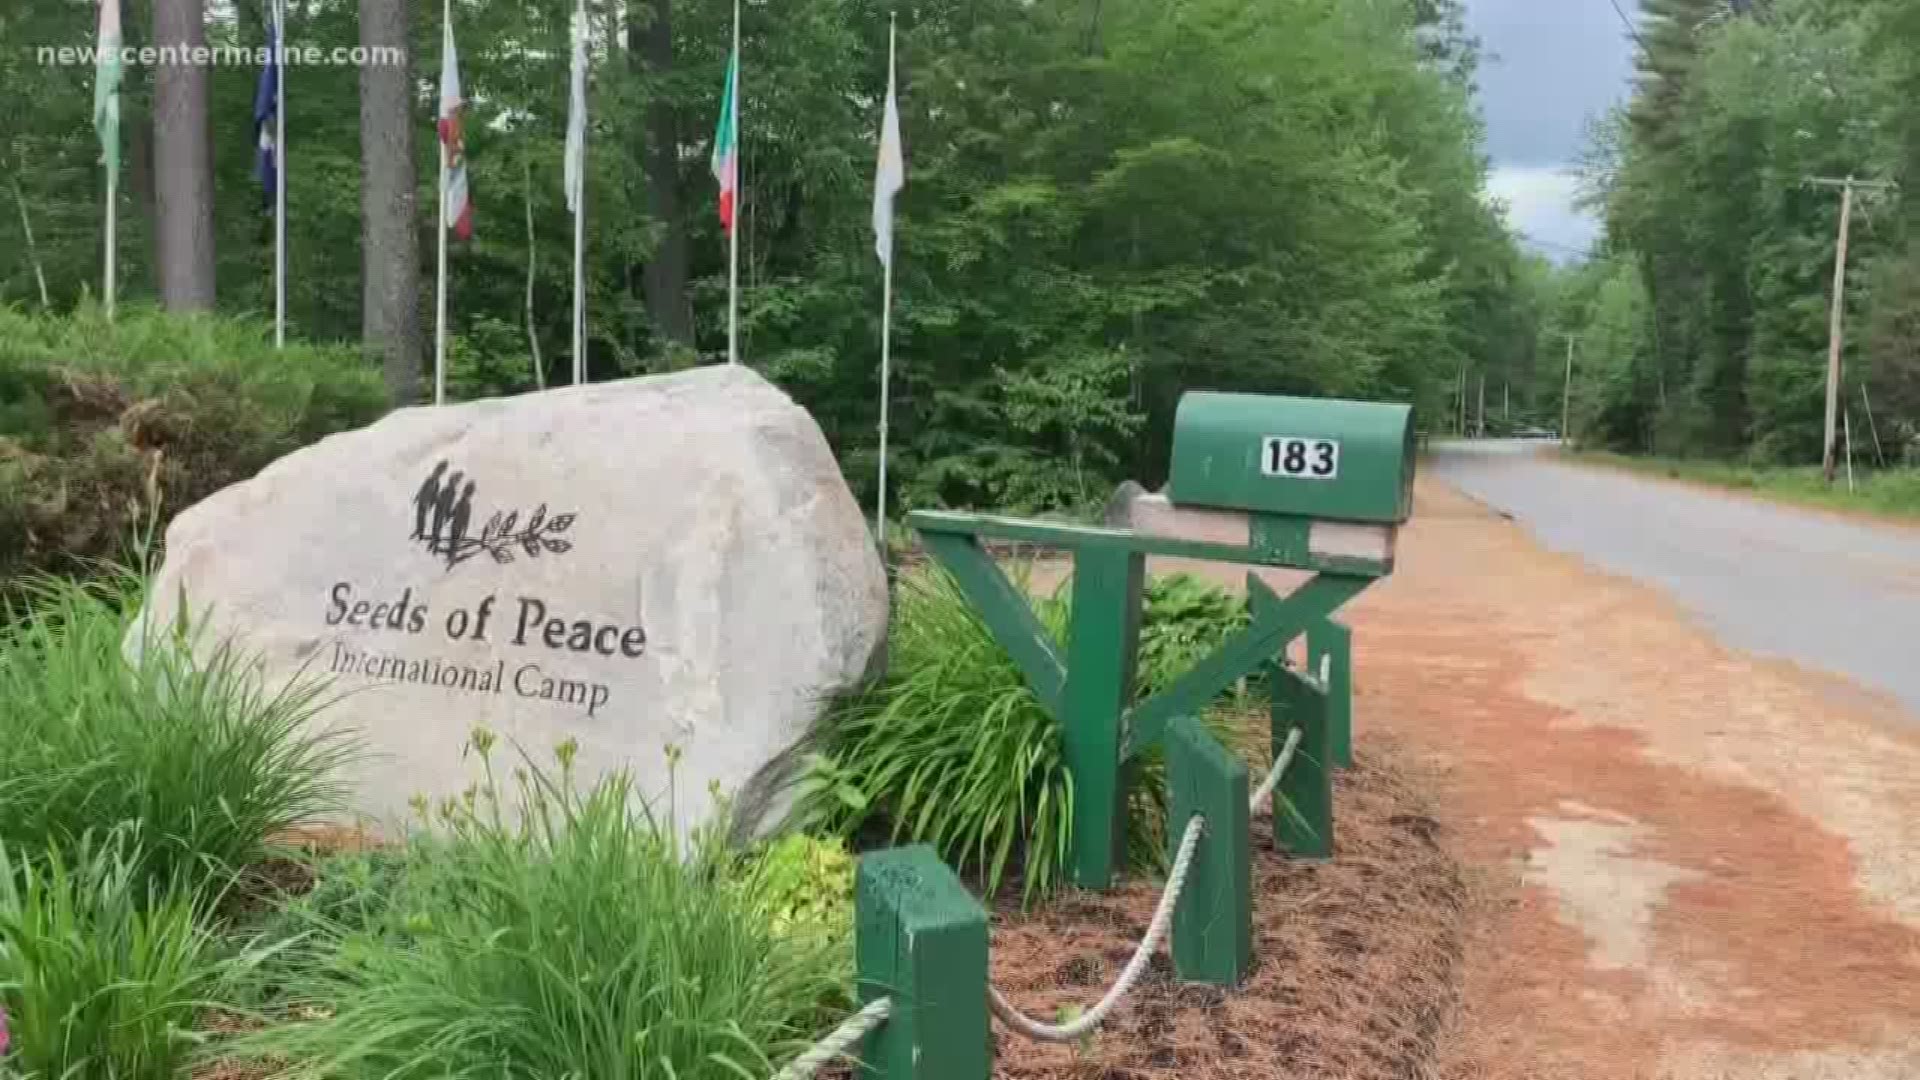 Seeds of Peace is a camp tucked away in the woods of Otisfield, where teens from around the world come together.